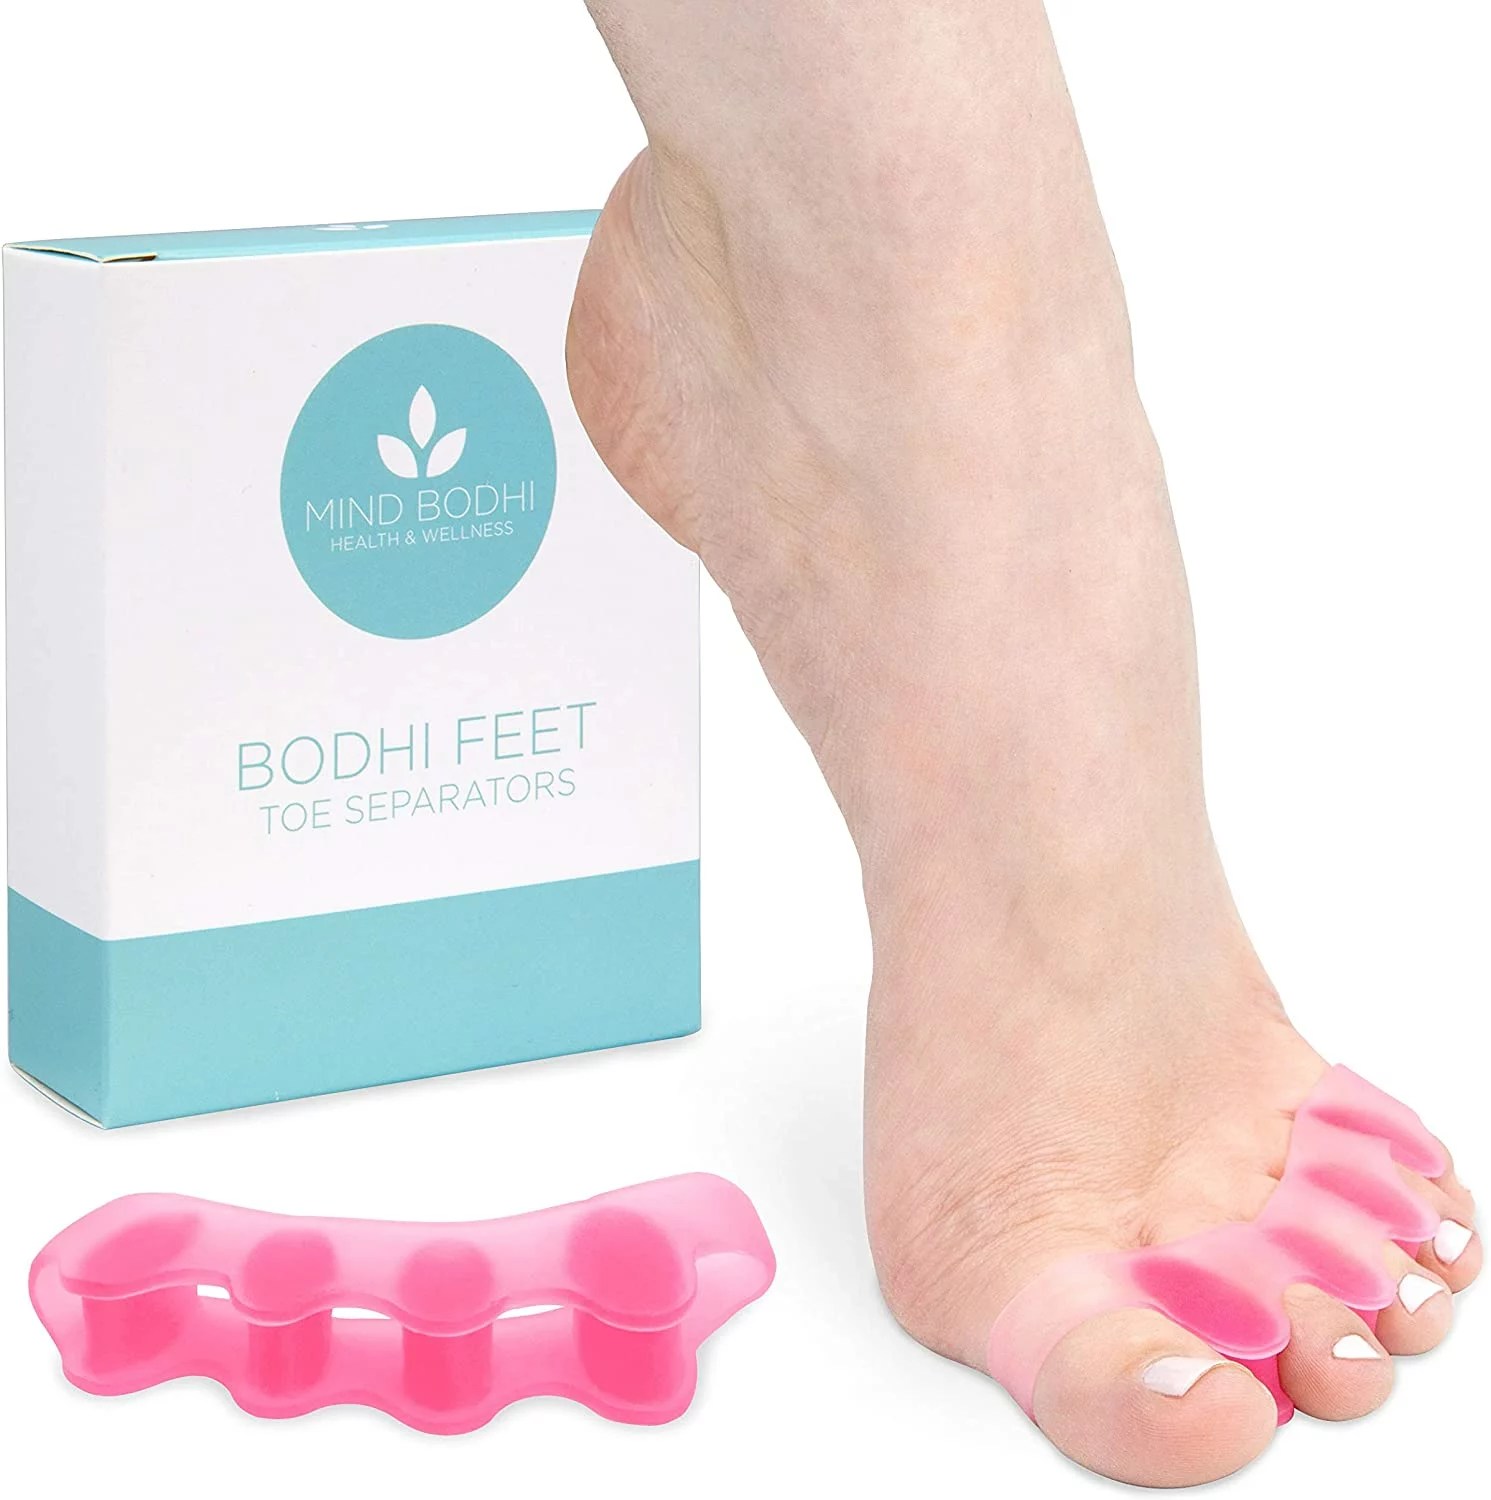 6 Best Toe Separators (Recommended by Podiatrists) 2023